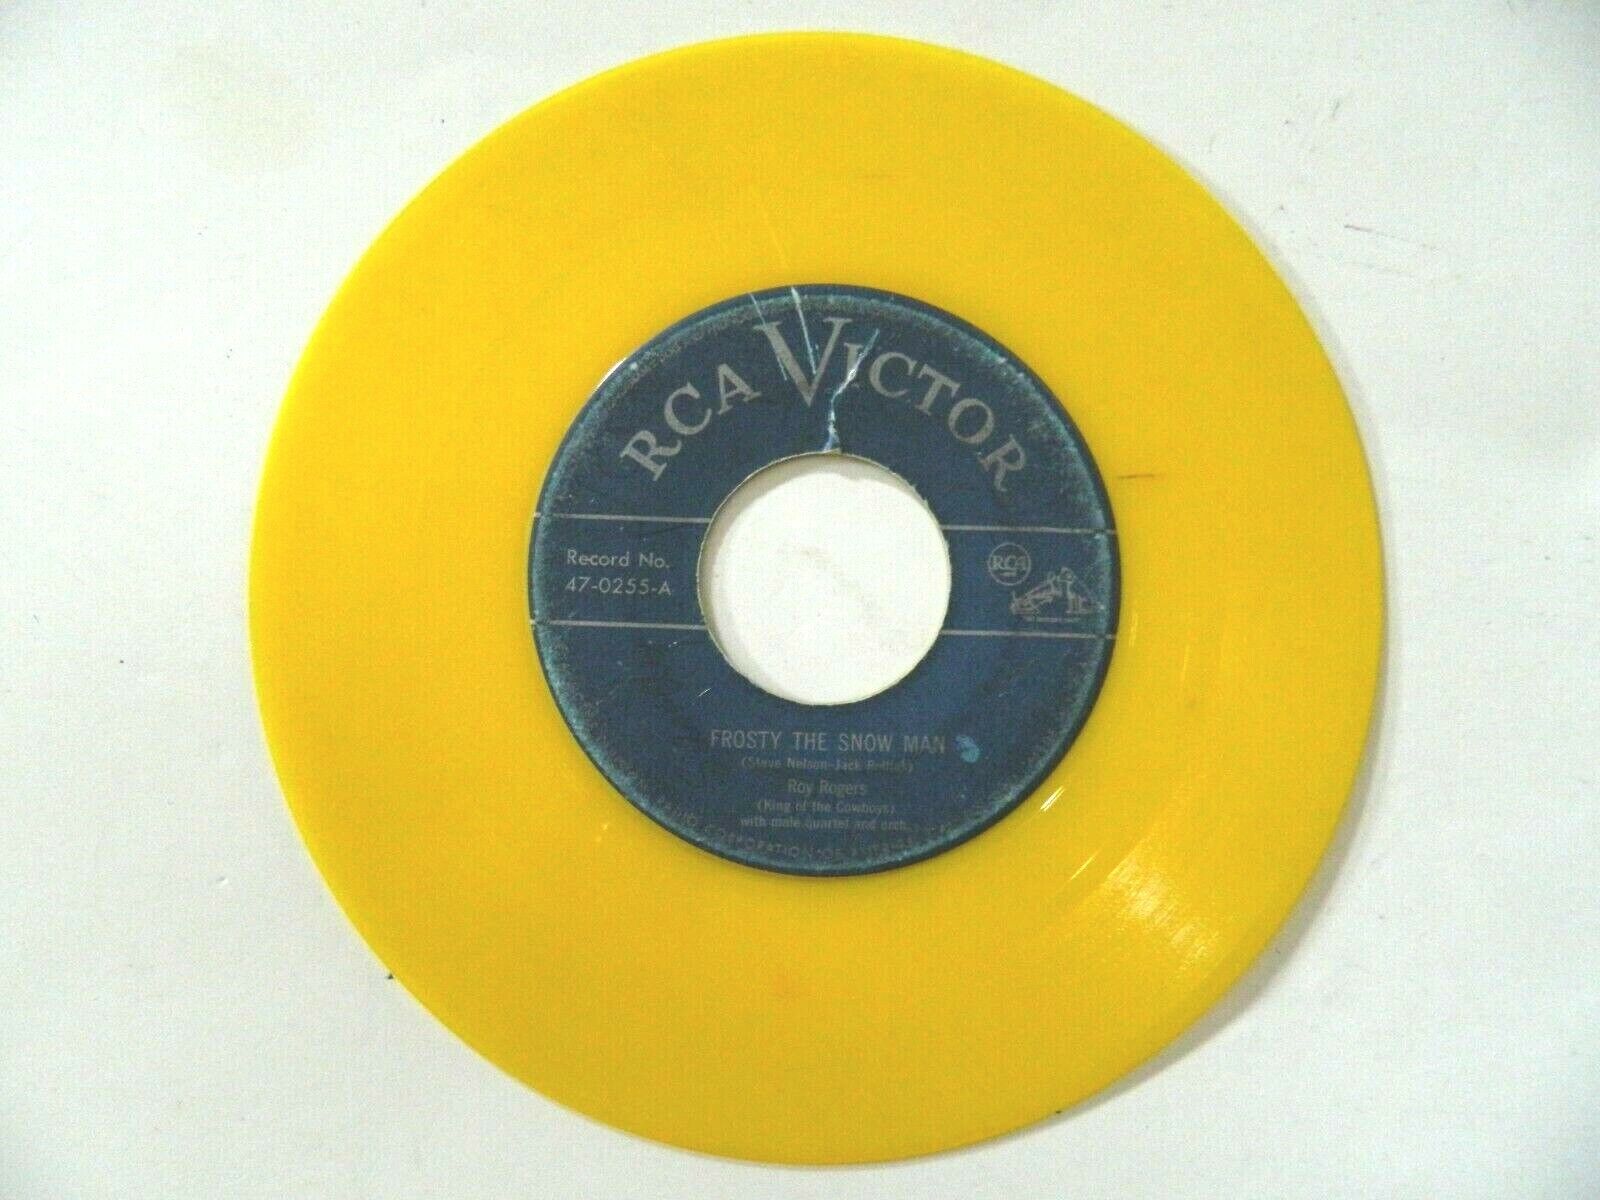 Vintage RCA VICTOR Yellow 45 - FROSTY THE SNOWMAN by ROY ROGERS #47-0255 VG